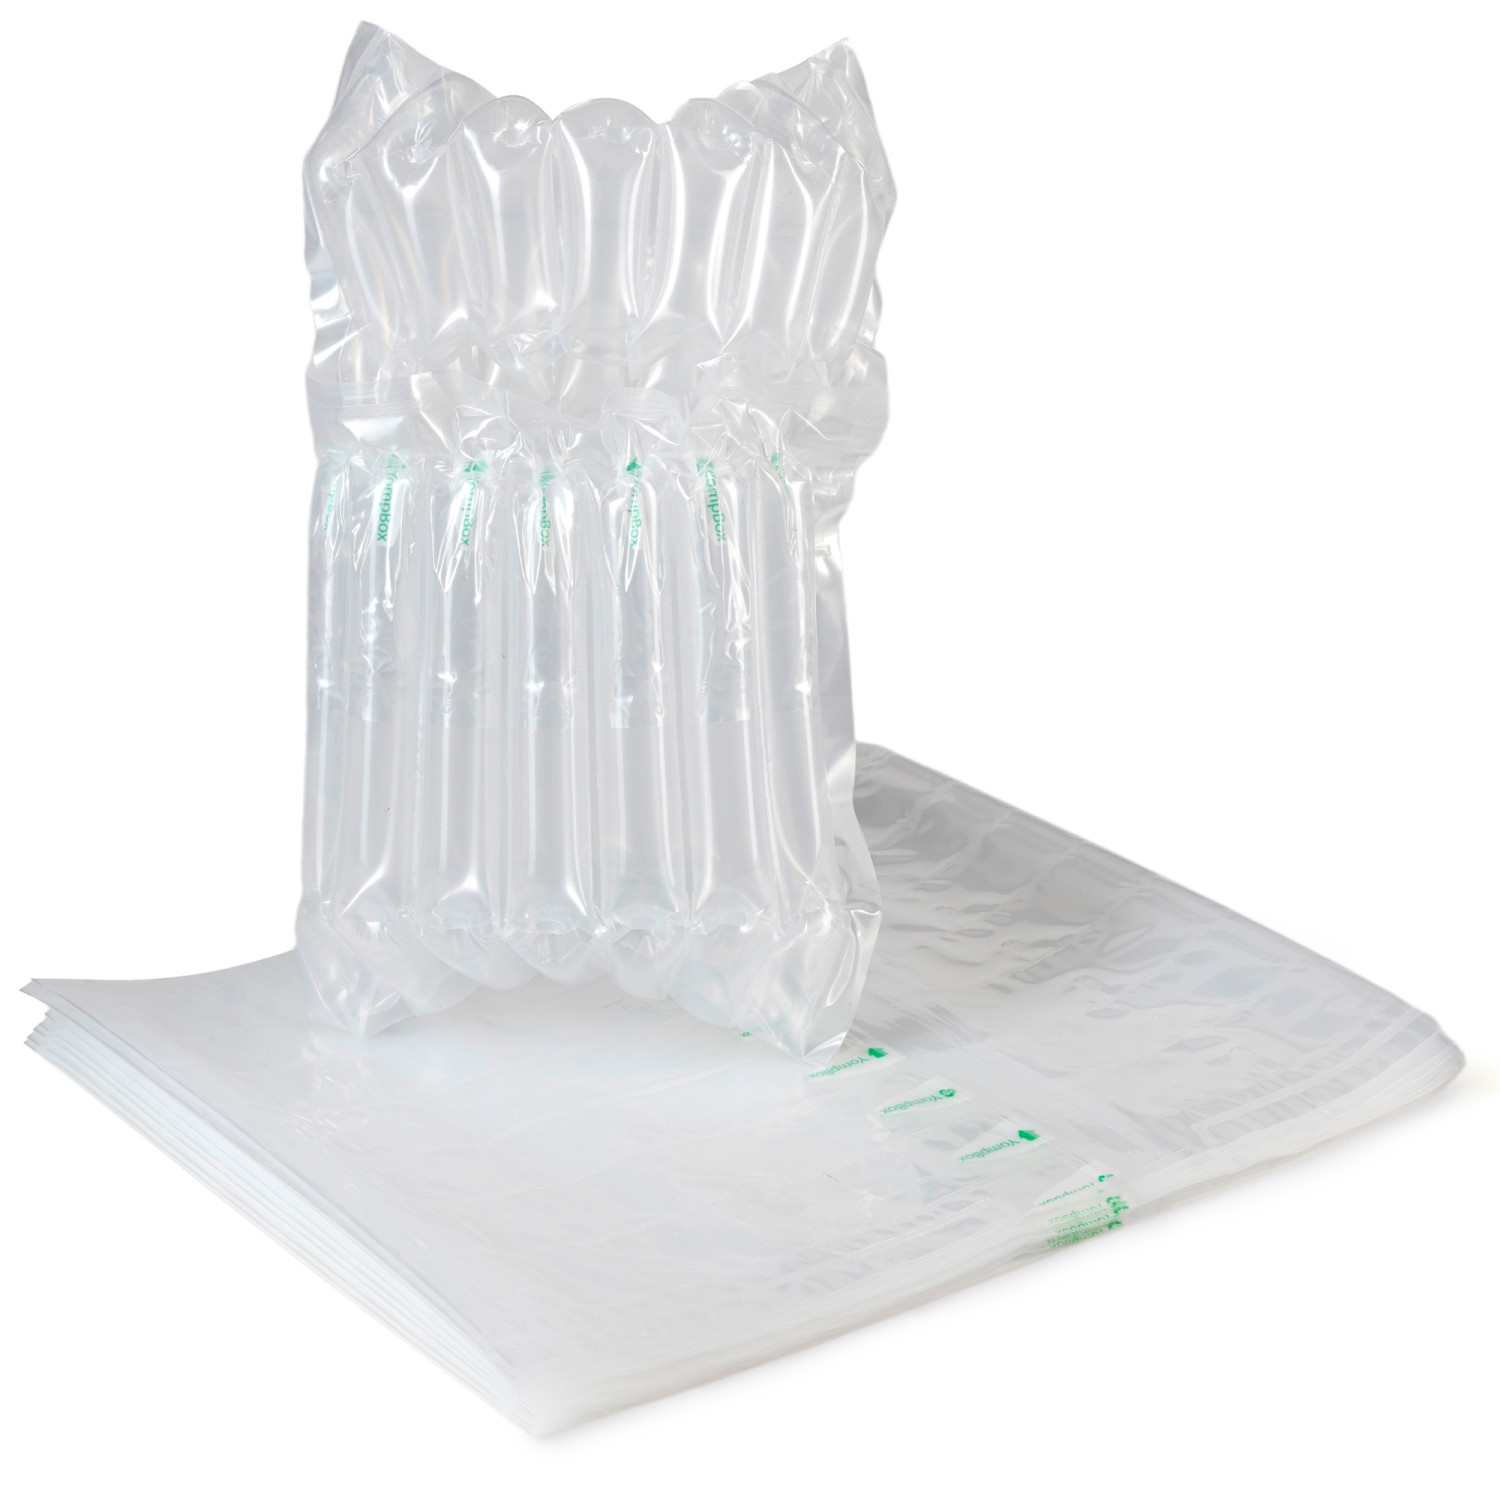 https://idlpack.com/image/cache/catalog/Products/Inflatable%20air%20tubes/2000%20px_Yomp-Box-Pillows-packs-of-10-9_white-bg-1500x1500.jpg